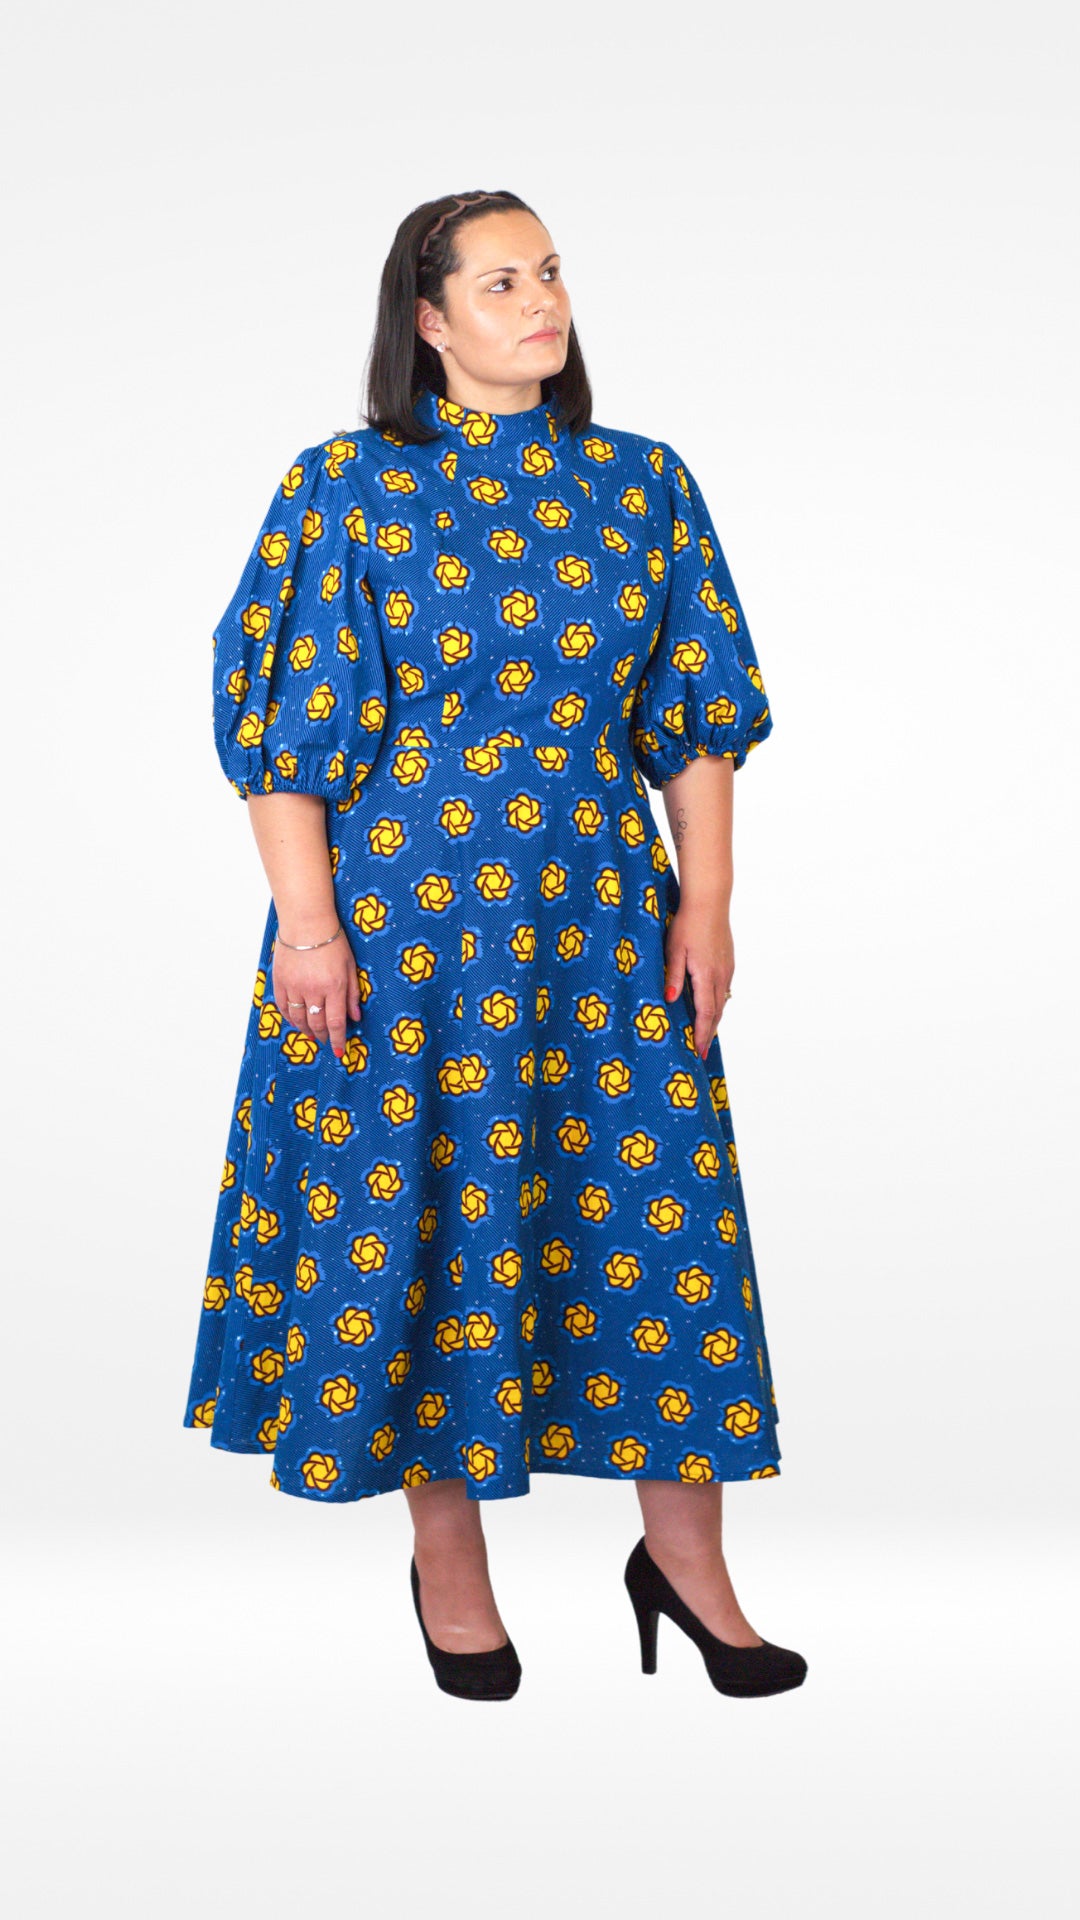 A model poses in a blue puff sleeve long dress with playful yellow elements and paired with black classic heels.